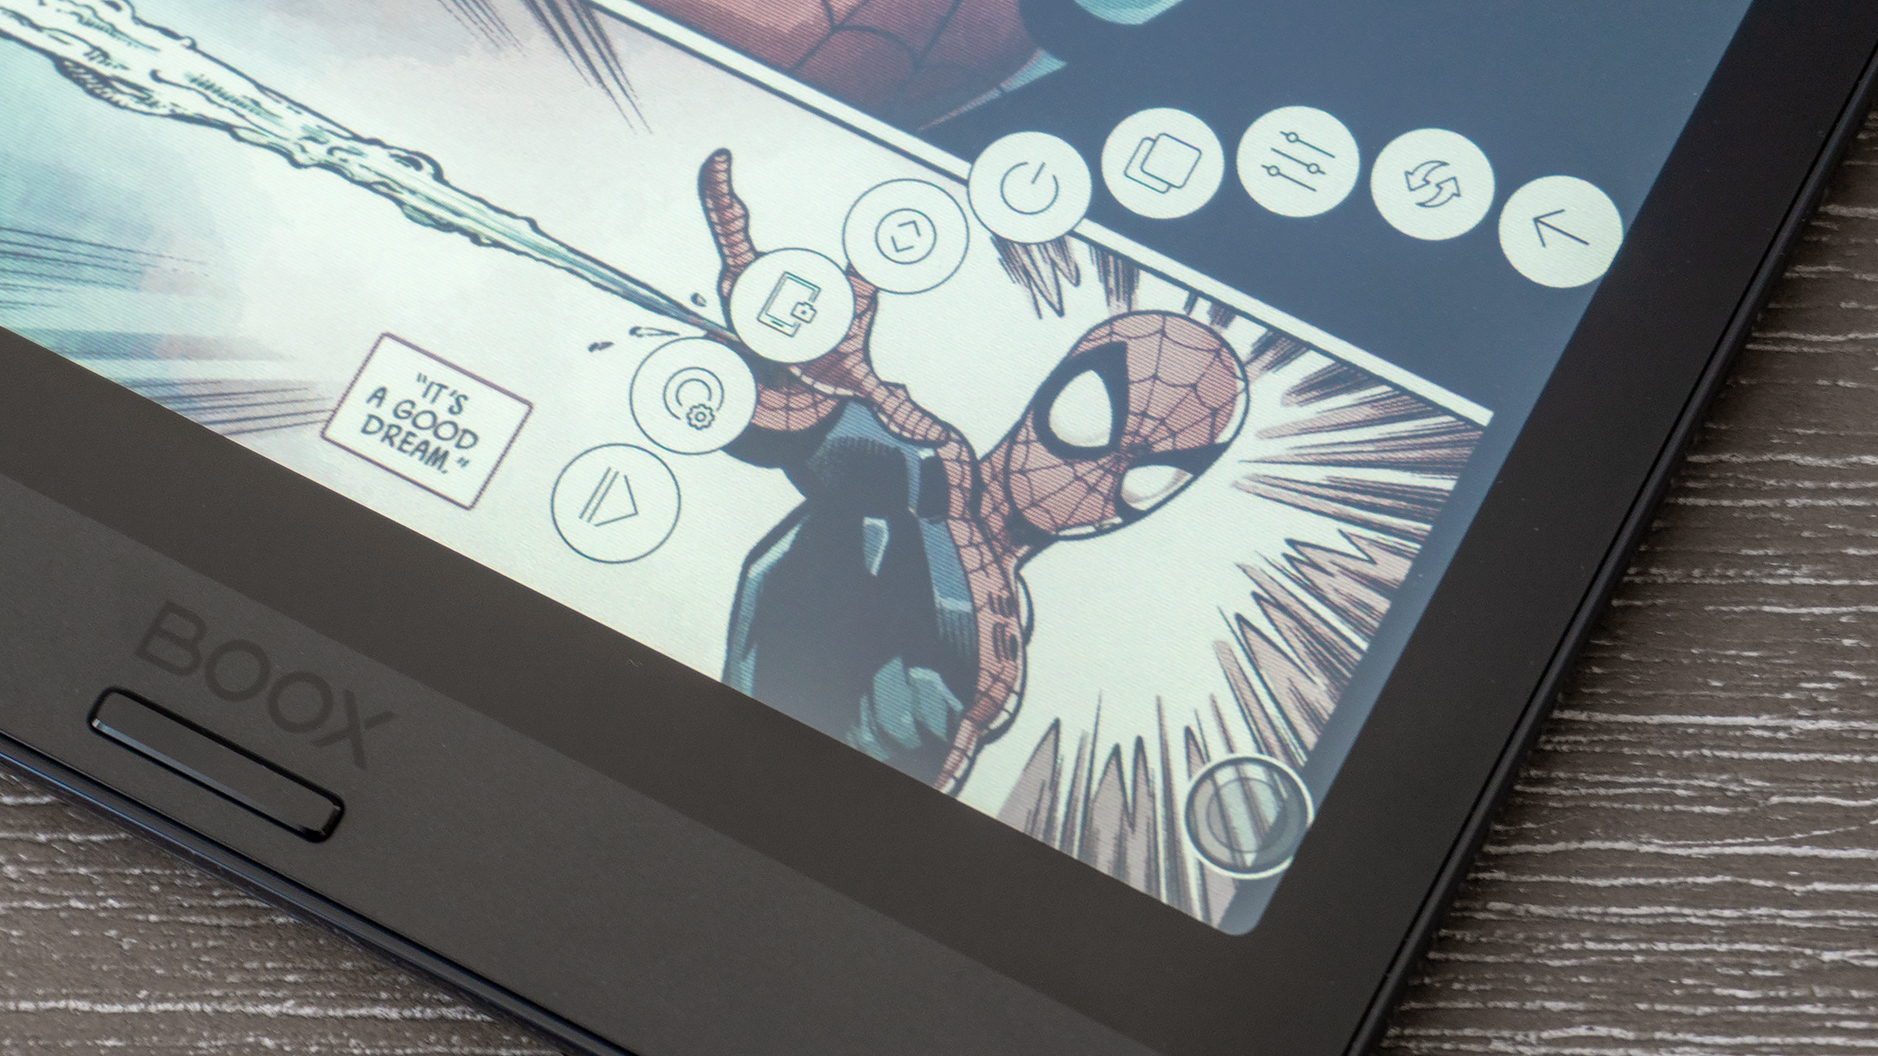 The Boox Nova 3 Colour's user interface is extremely customisable, but it lacks the polish of the UIs used by dedicated e-readers like the Kindle or Kobo. (Photo: Andrew Liszewski/Gizmodo)